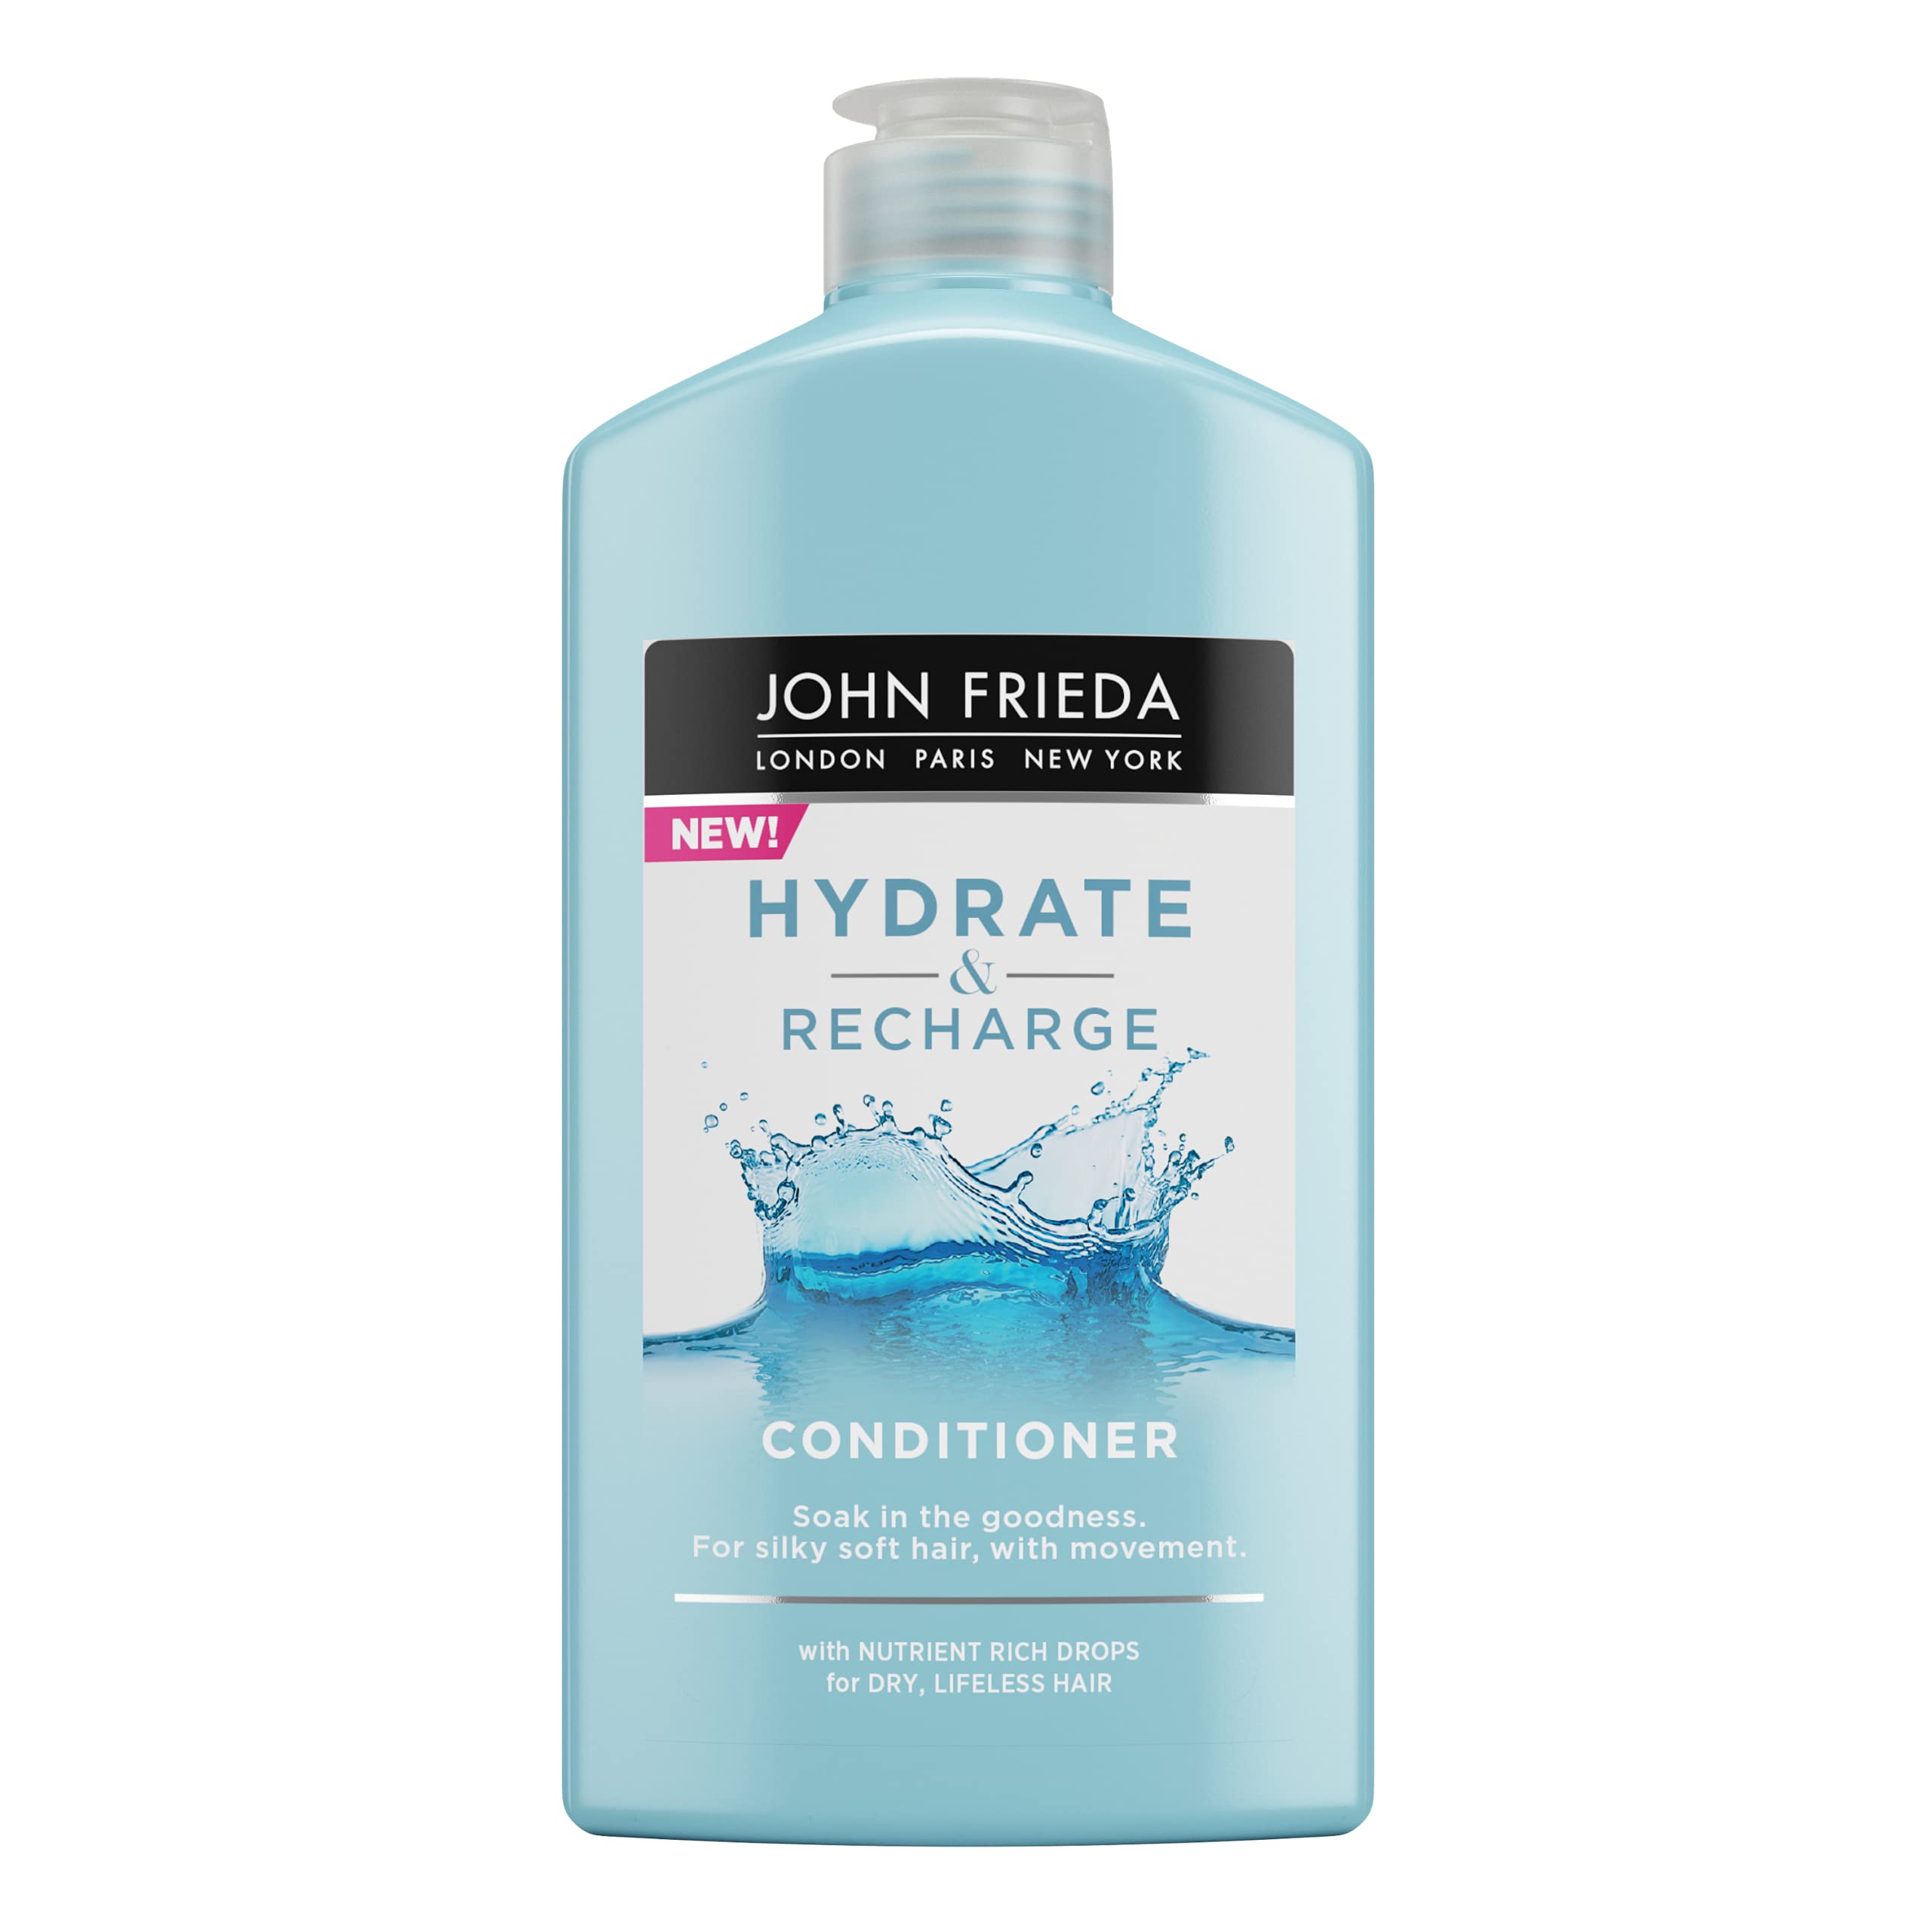 John Frieda Hydrate & Recharge Conditioner with Monoi Oil & Keratin for Dry, Lifeless Hair, 250 ml